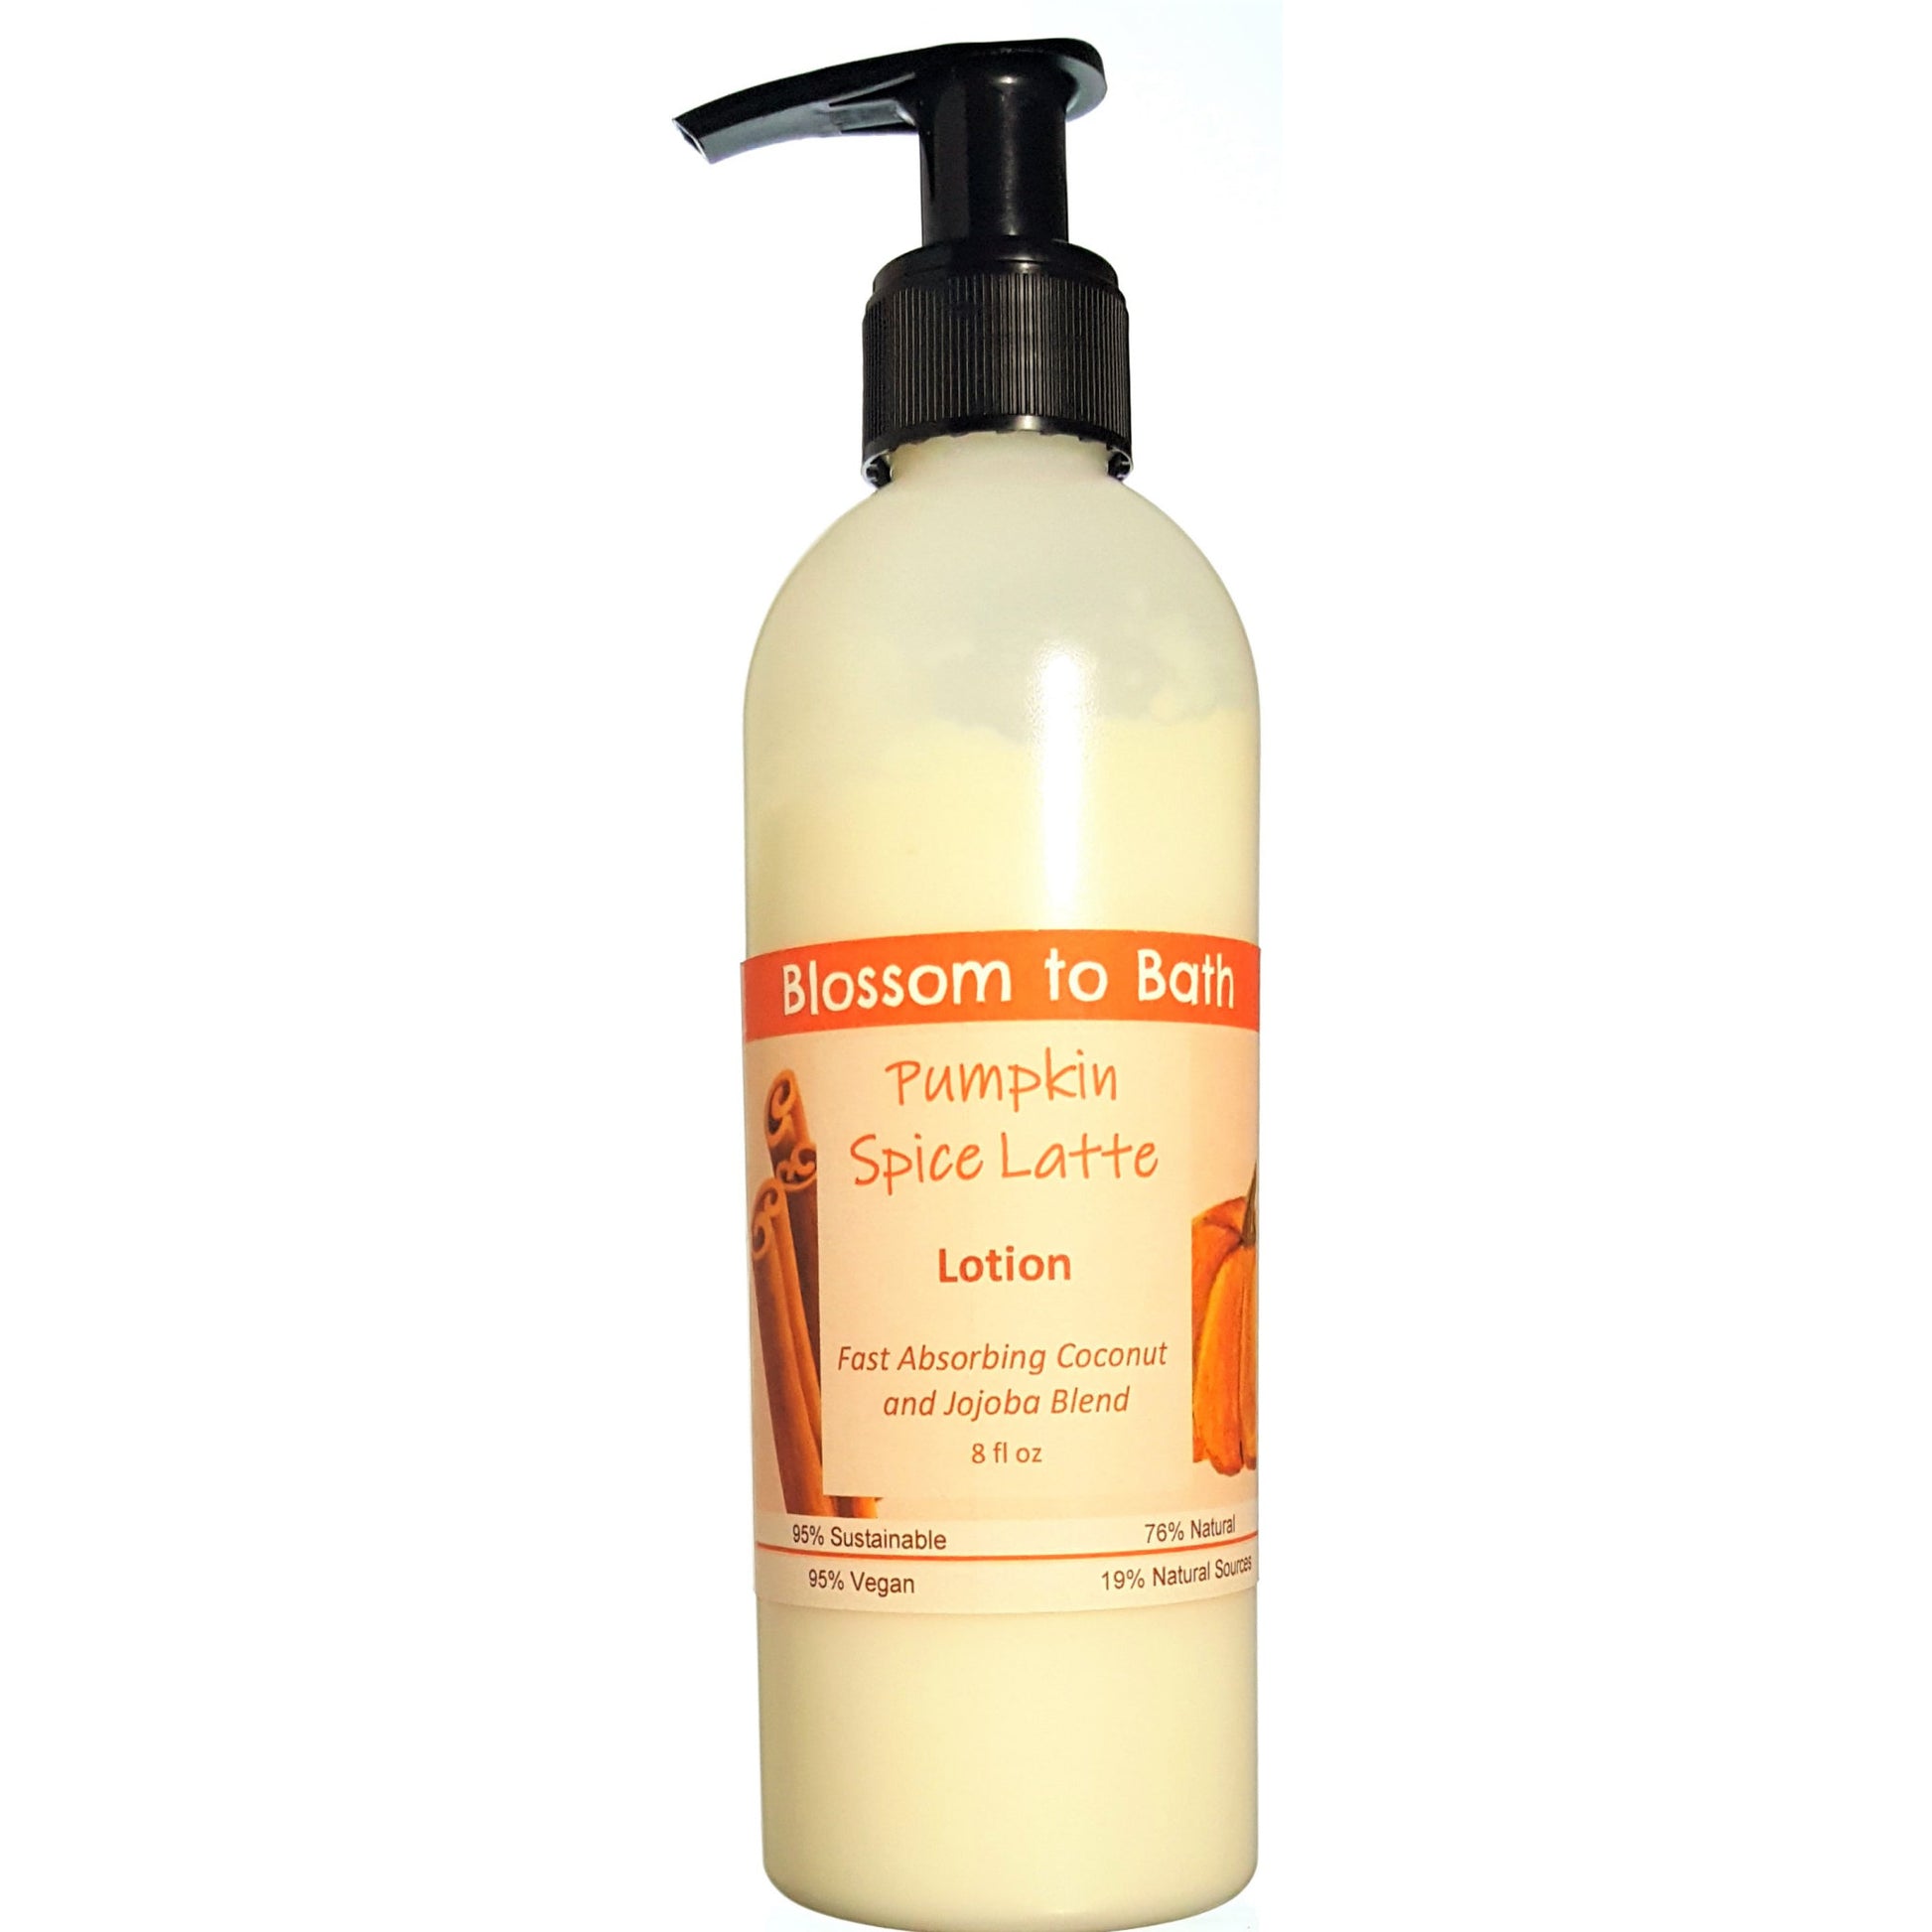 Buy Blossom to Bath Pumpkin Spice Latte Lotion from Flowersong Soap Studio.  Daily moisture  that soaks in quickly made with organic oils and butters that soften and smooth the skin  Deep vanilla and lightly fruited spice blend seamlessly with rich coffee.